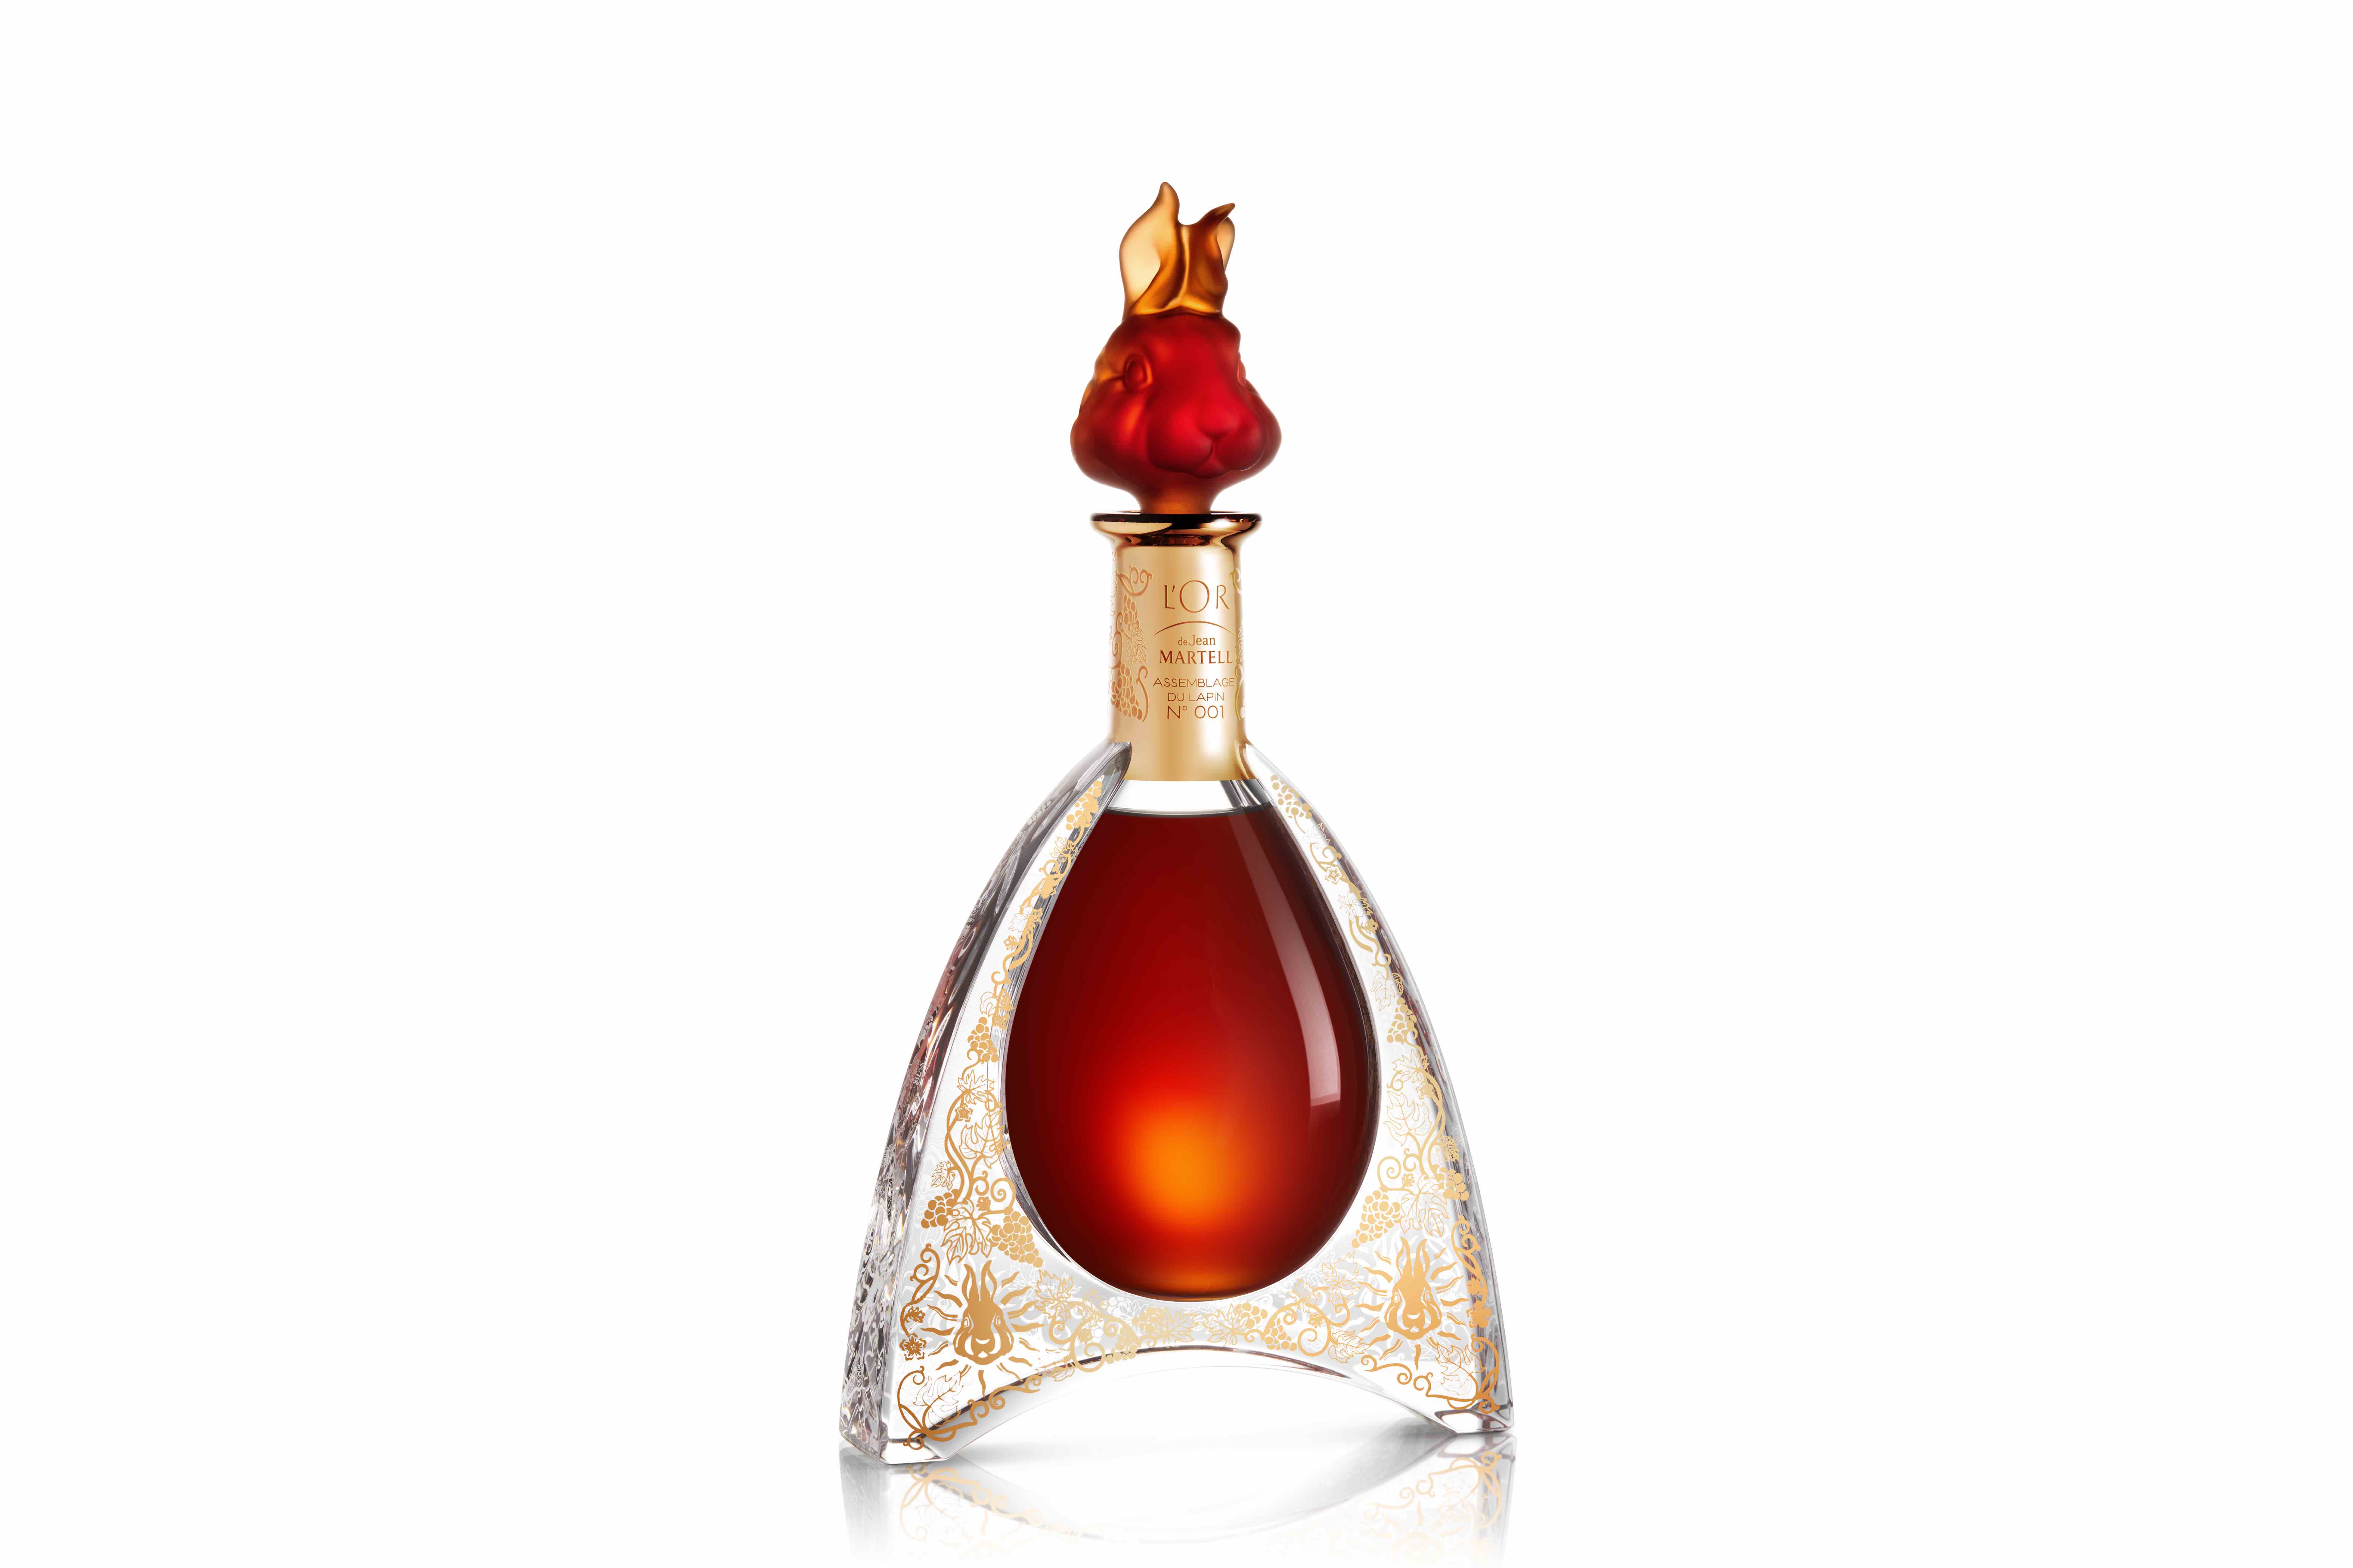 Martell L’Or de Jean Martell Assemblage du Lapin Year of the Rabbit limited edition